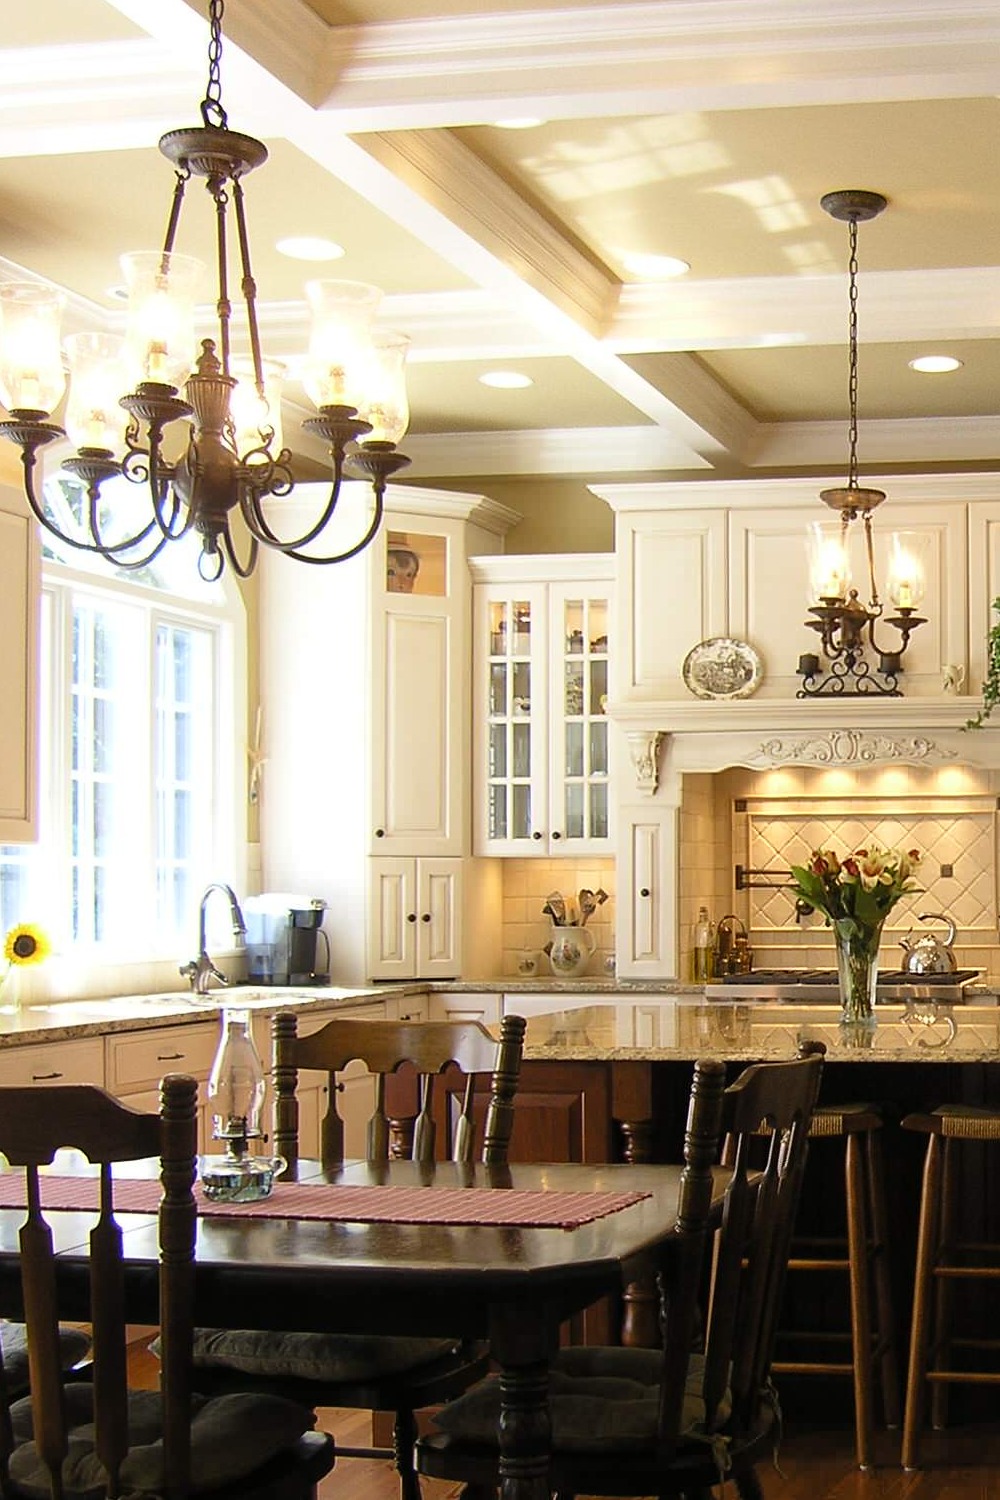 White Coffered Ceilings Dining Room Marble Countertop Interior Design Beach House Bar Style High End Walls